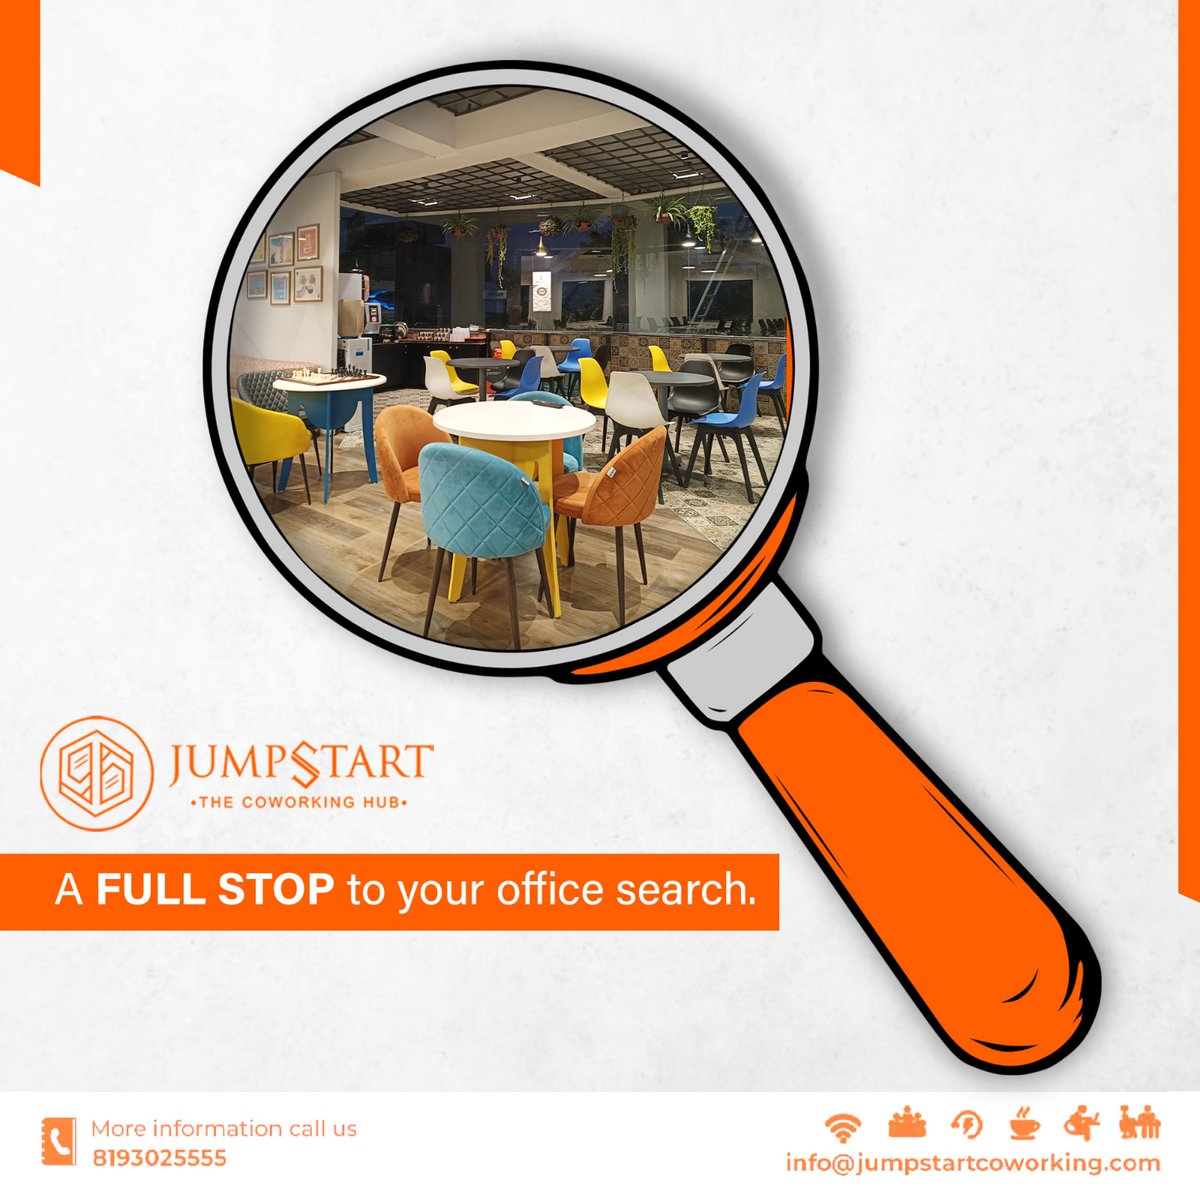 Put a full stop to your office search as we have got you covered with the best Co-working hub in Dehradun.
#jumpstart #coworking  #coworkingspace  #coworkingcommunity  #smartwork  #coworkinghub  #dehradun  #officesearch #searchover  #ReserveNow